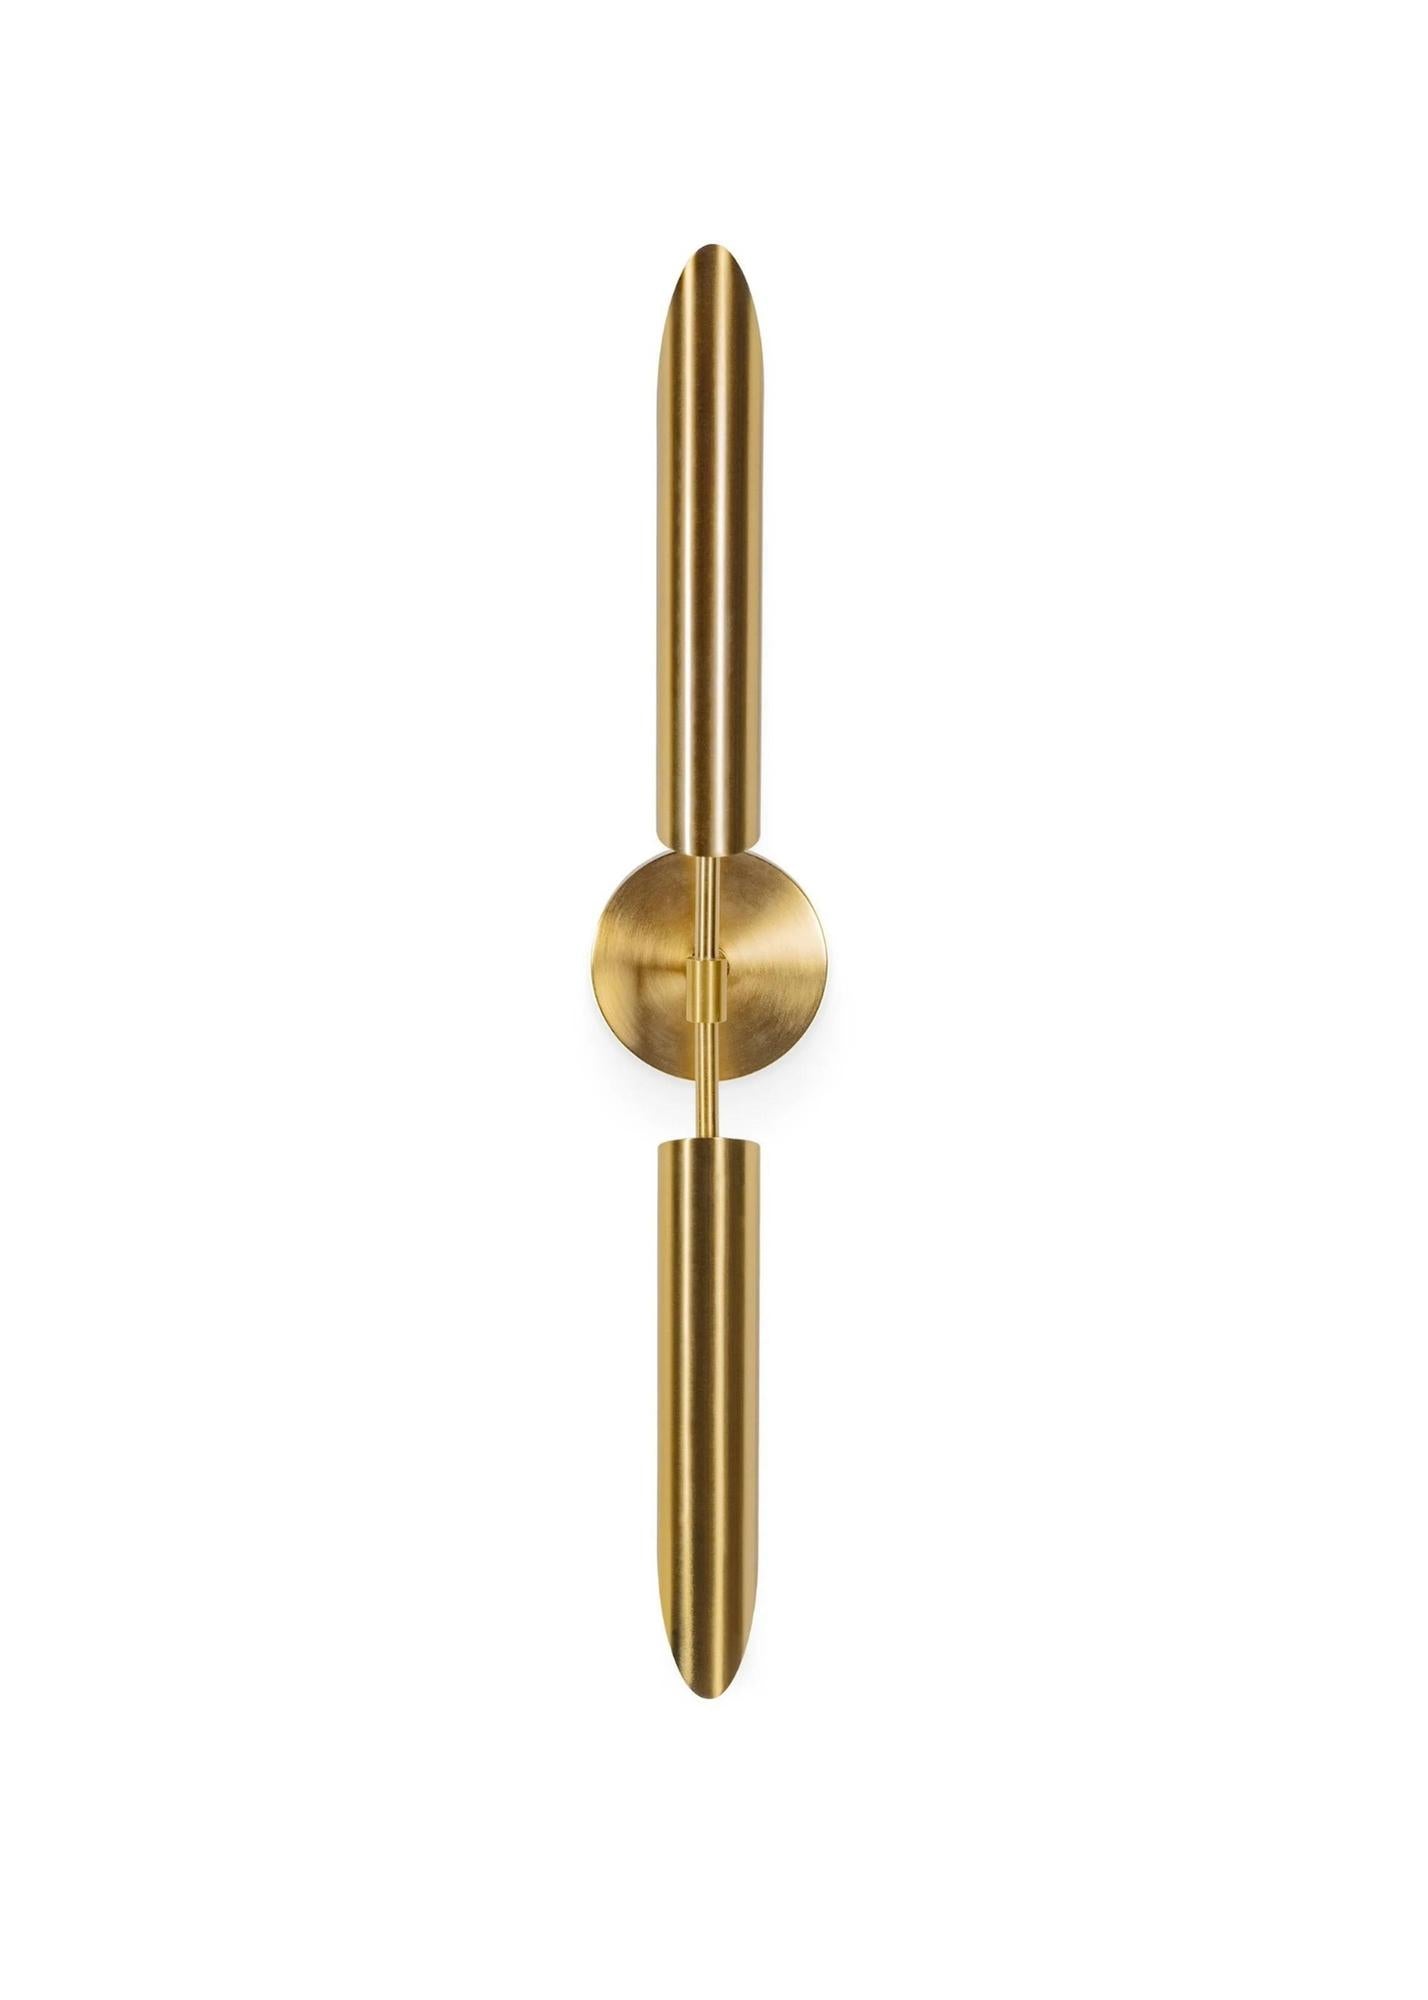 Sadie Wall Sconce by Lights On Collection